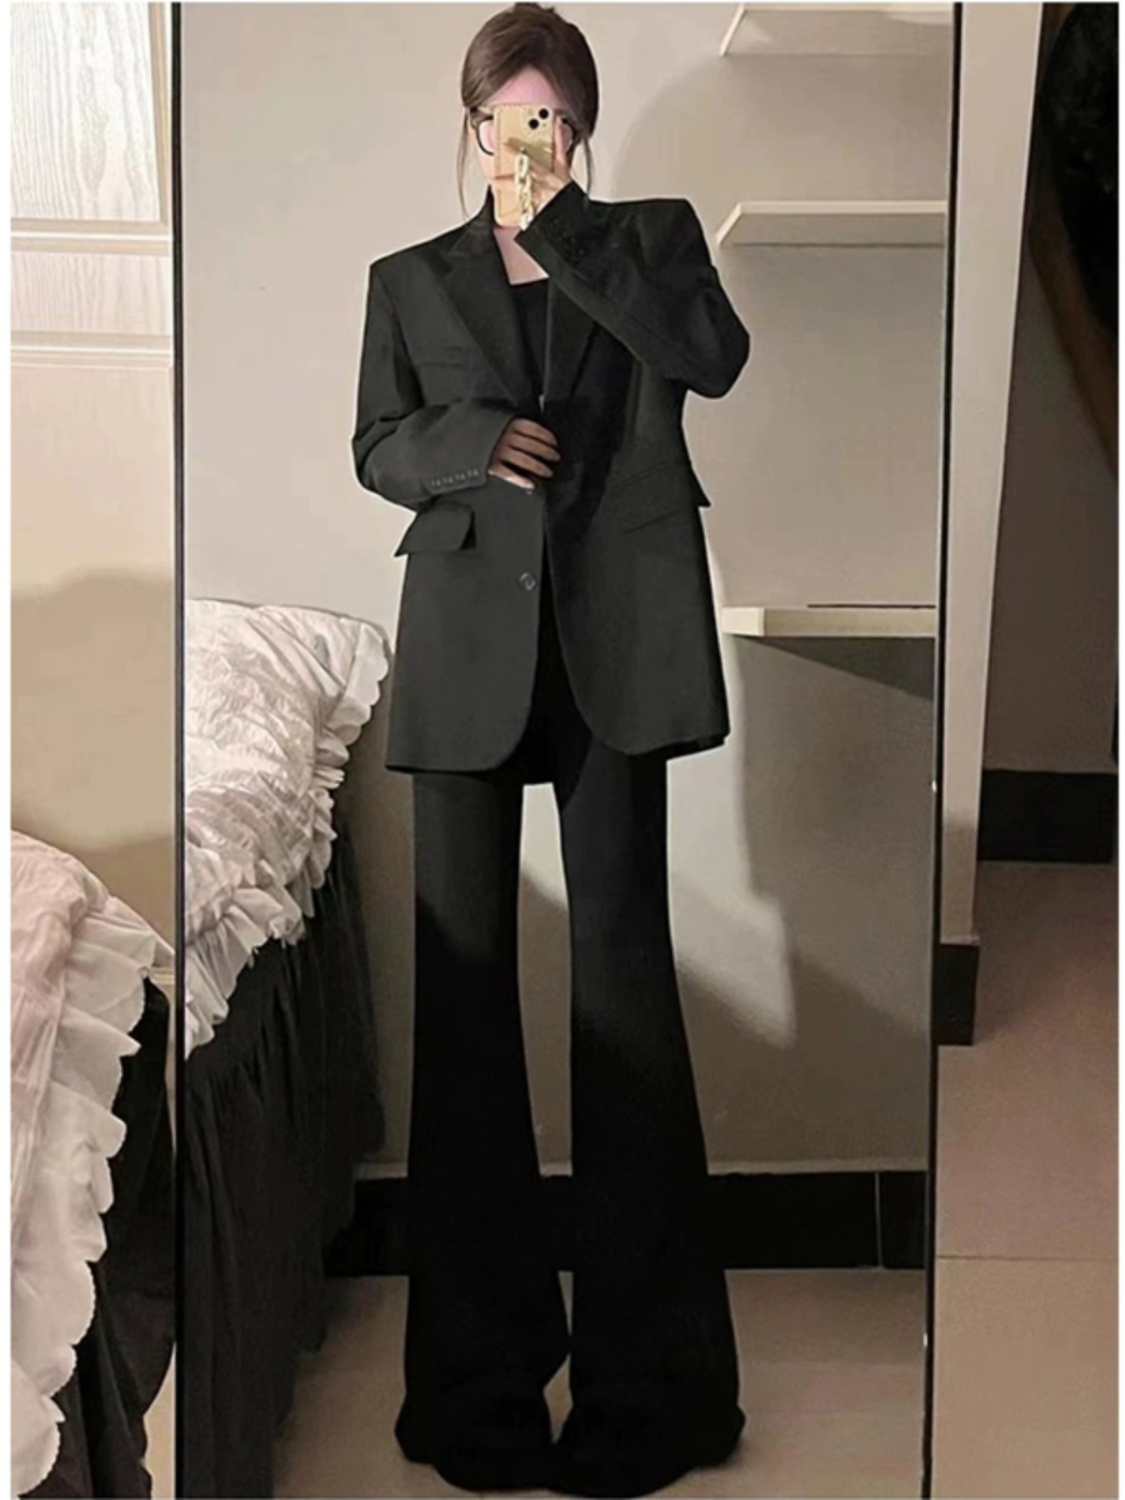 Black suit jacket for women spring and autumn new style small high-end design casual temperament versatile suit top